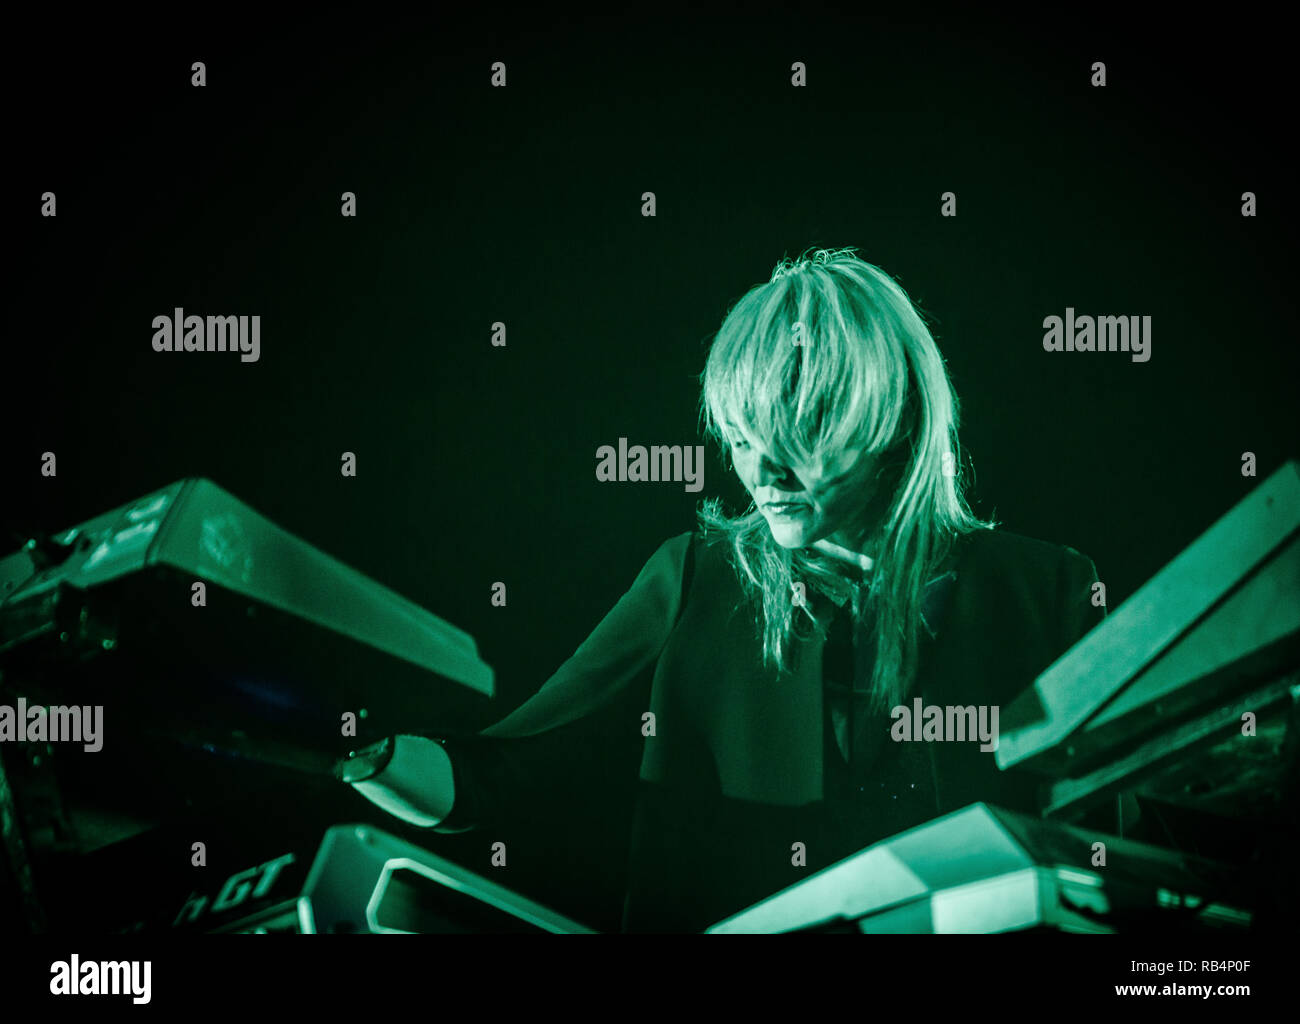 Faithless, the British electronica band, performs a live concert at the Danish music festival Tinderbox Festival 2015 in Odense. Here keyboardist Sister Bliss is seen live on stage. Denmark, 27/06 2015. EXCLUDING DENMARK. Stock Photo